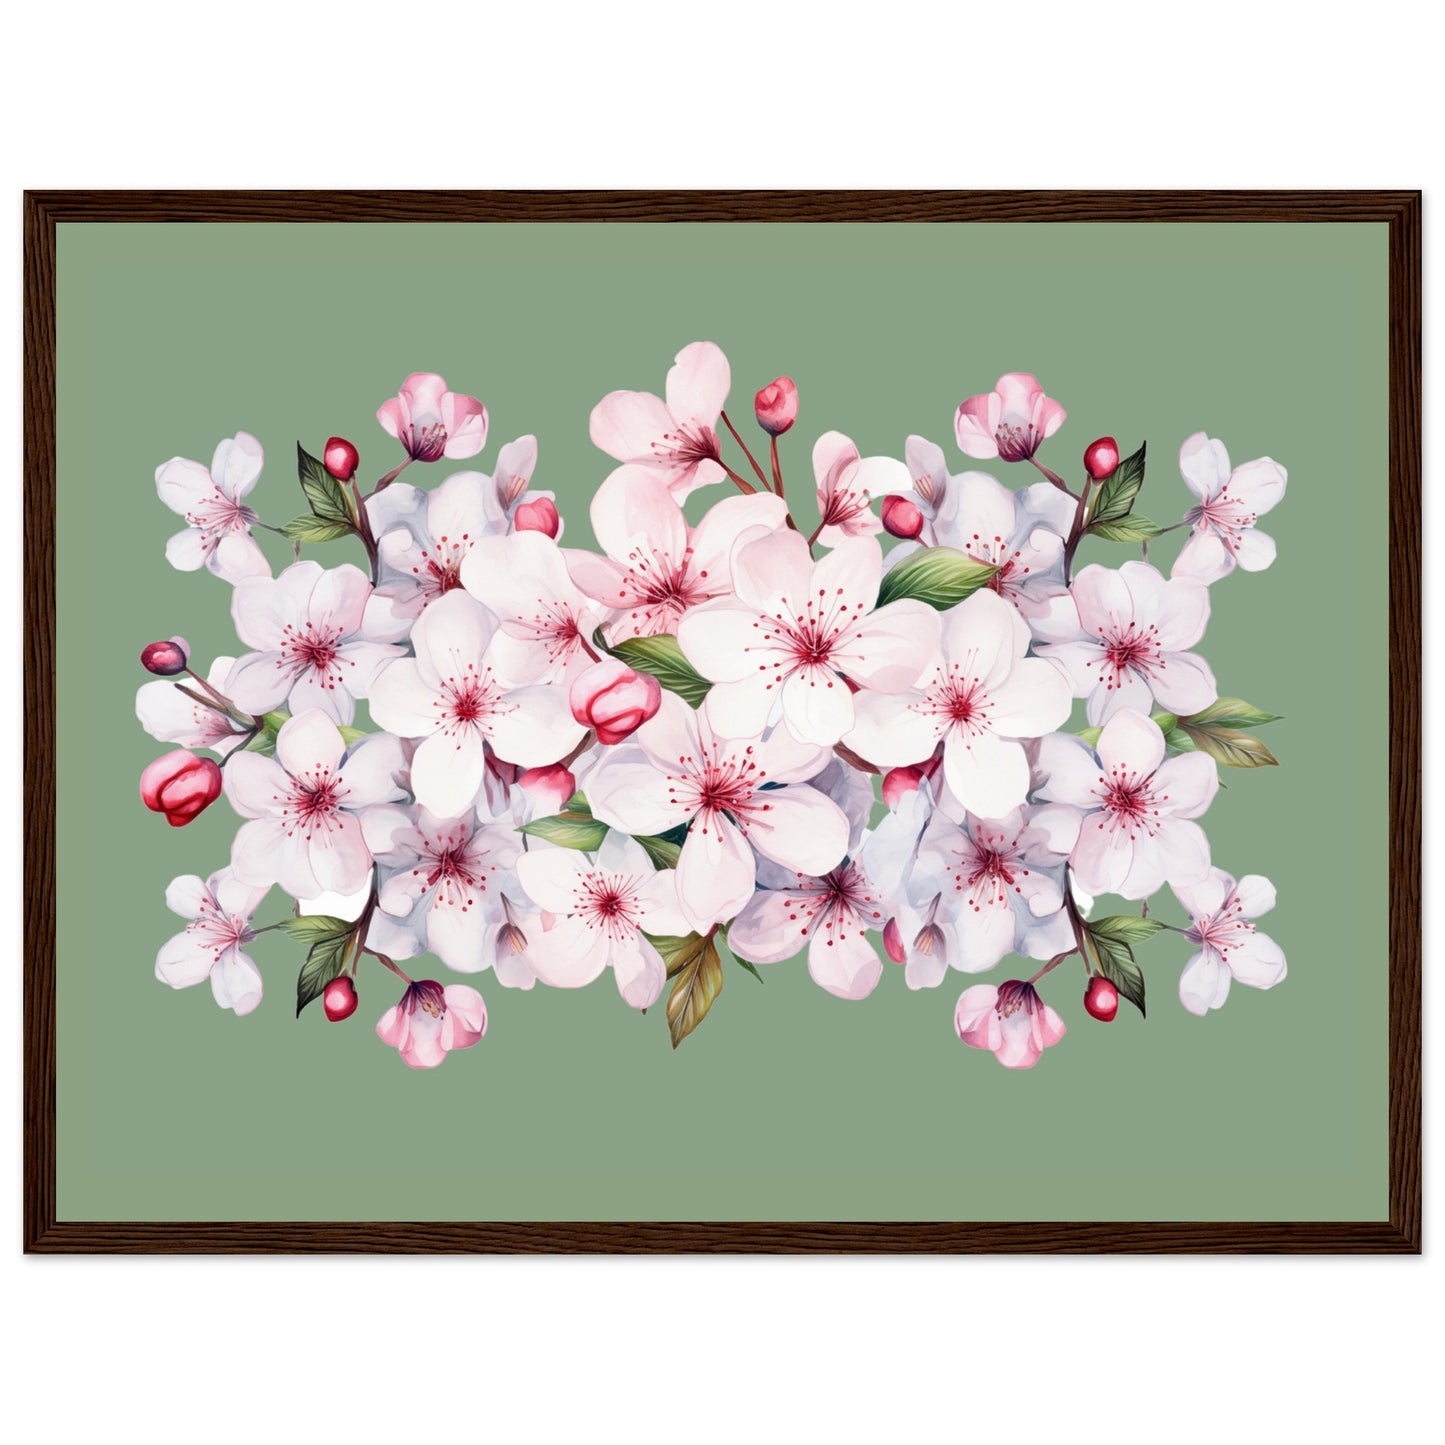 CHERRY BLOSSOMS No. 3 in GREEN Background - Premium Matte Paper Wooden Framed Poster